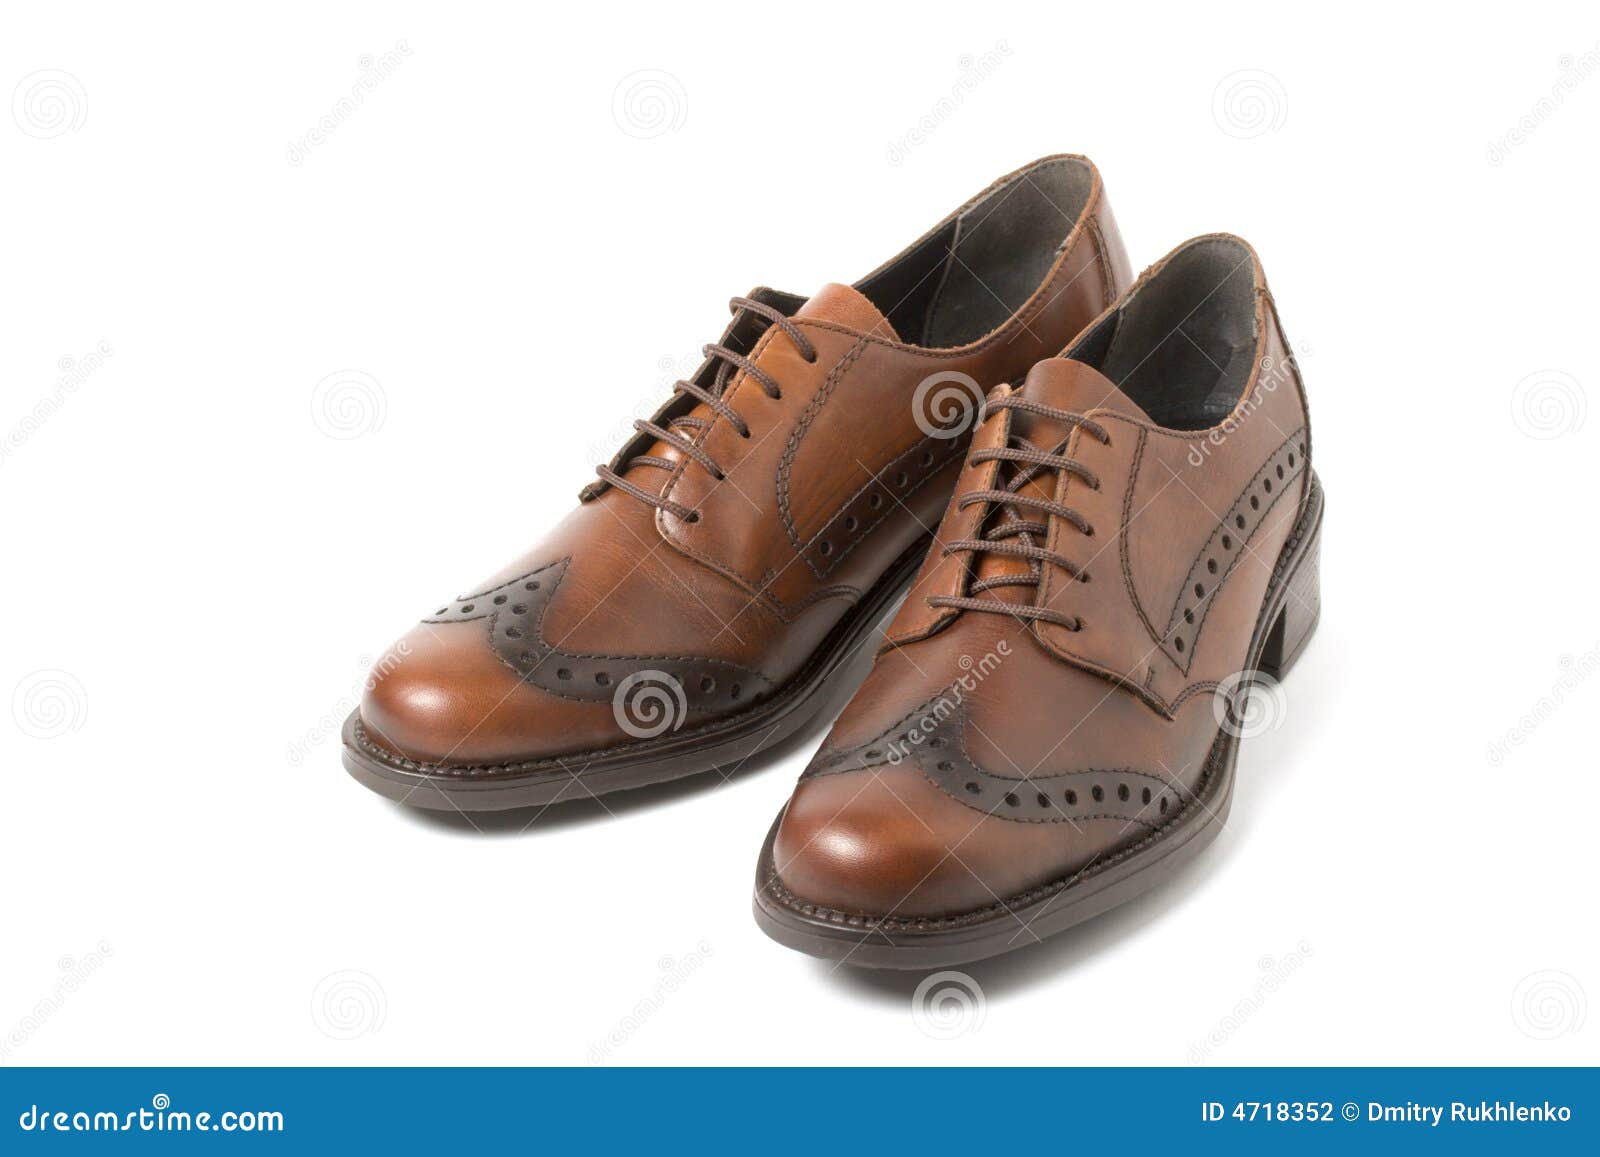 Two Brown Shoes Isolated on White Stock Photo - Image of walking ...